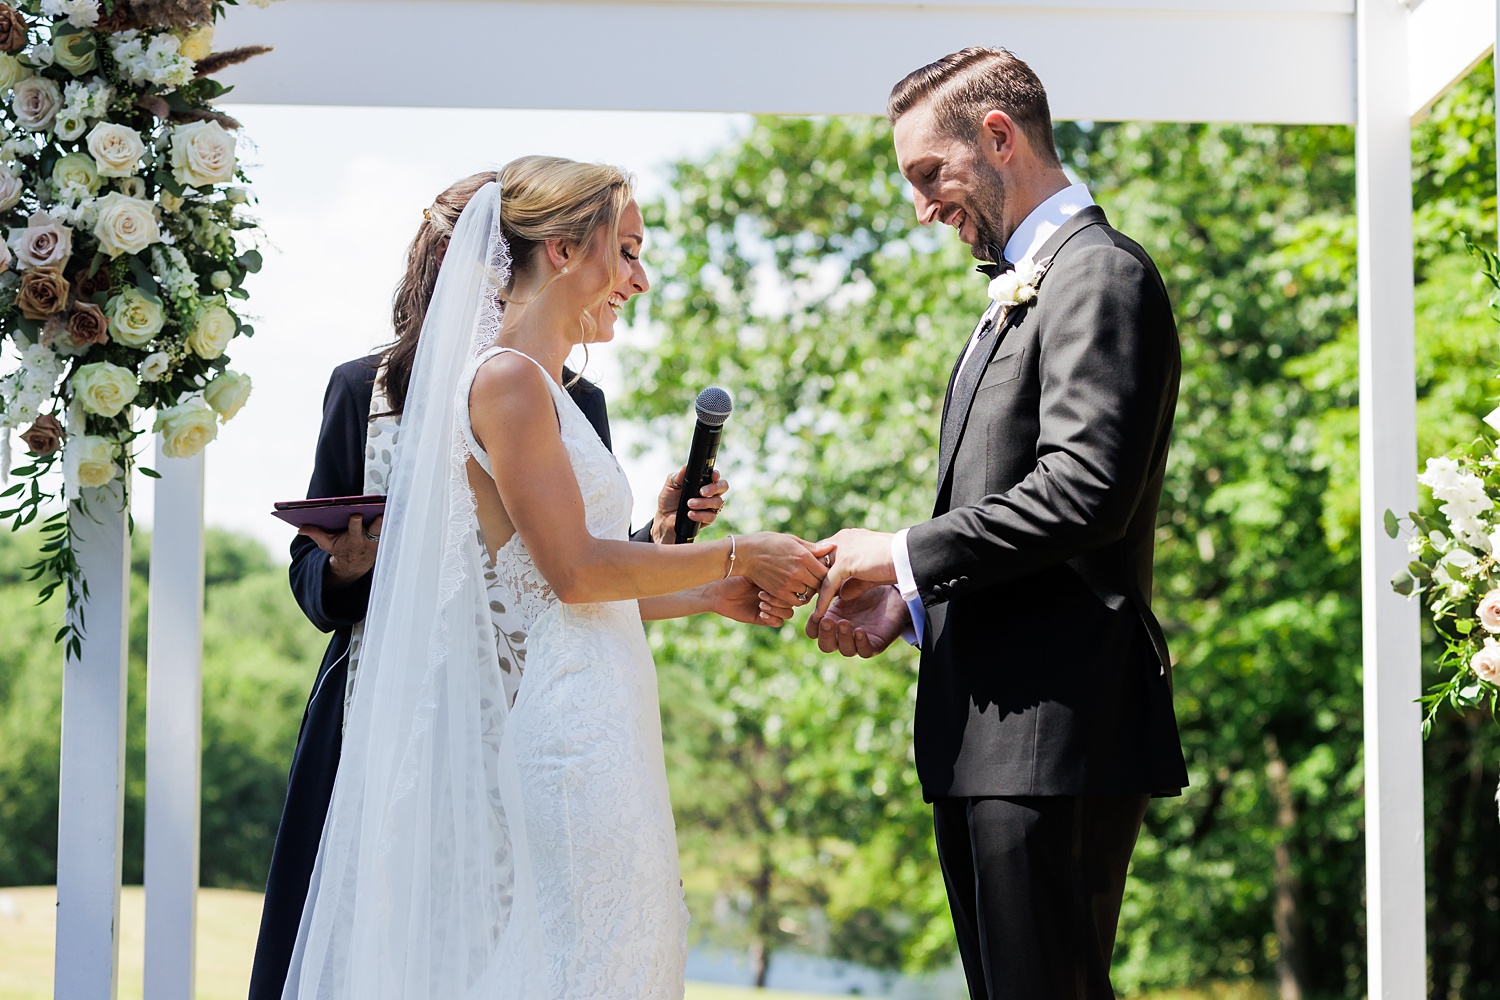 Exchanging wedding bands during the Maine outdoor ceremony